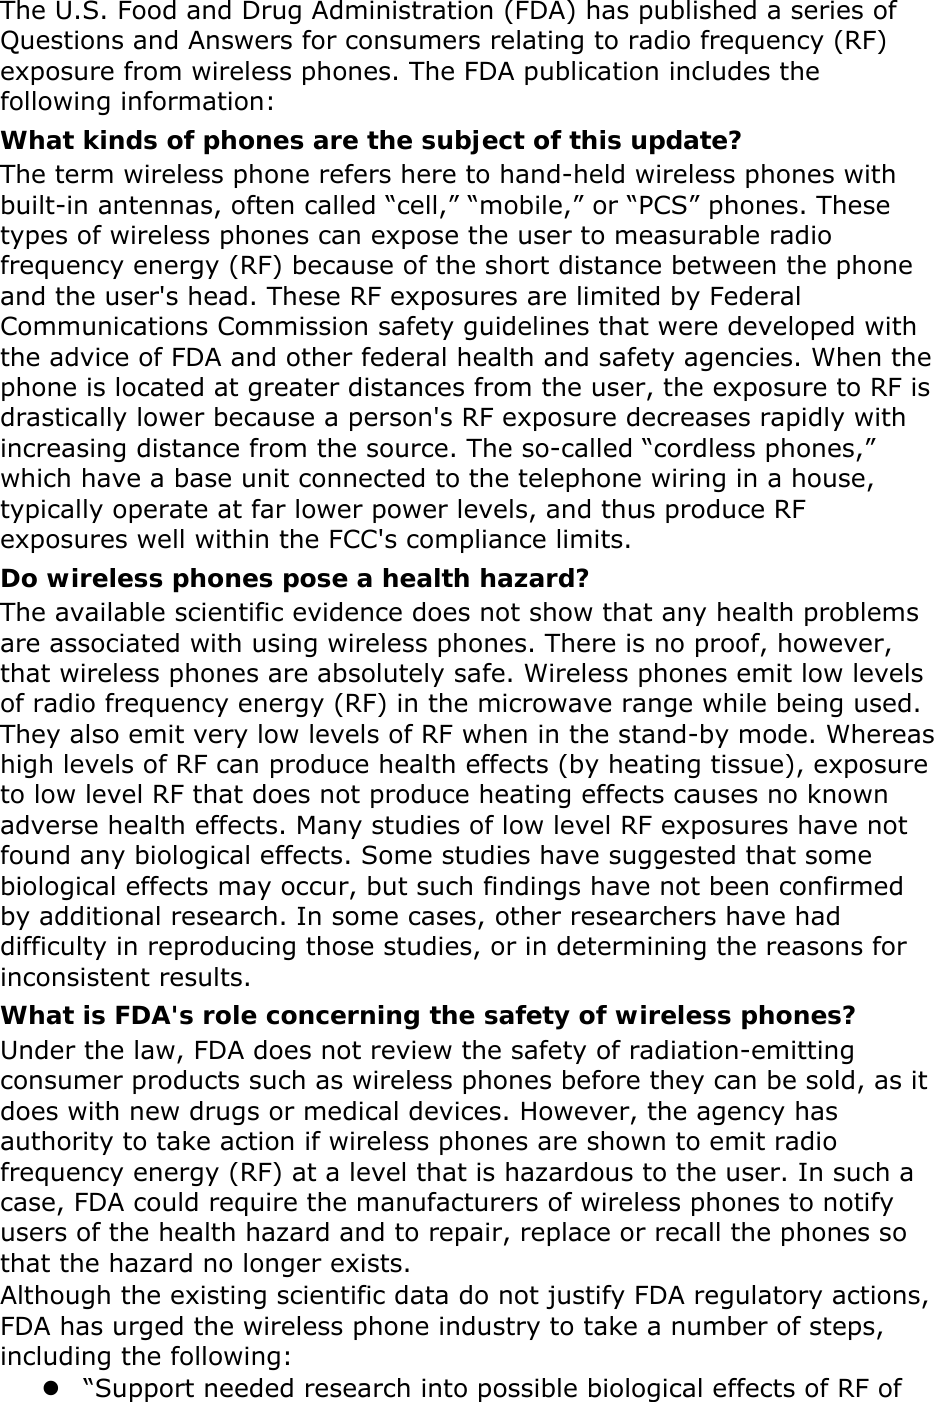 The U.S. Food and Drug Administration (FDA) has published a series of Questions and Answers for consumers relating to radio frequency (RF) exposure from wireless phones. The FDA publication includes the following information: What kinds of phones are the subject of this update? The term wireless phone refers here to hand-held wireless phones with built-in antennas, often called “cell,” “mobile,” or “PCS” phones. These types of wireless phones can expose the user to measurable radio frequency energy (RF) because of the short distance between the phone and the user&apos;s head. These RF exposures are limited by Federal Communications Commission safety guidelines that were developed with the advice of FDA and other federal health and safety agencies. When the phone is located at greater distances from the user, the exposure to RF is drastically lower because a person&apos;s RF exposure decreases rapidly with increasing distance from the source. The so-called “cordless phones,” which have a base unit connected to the telephone wiring in a house, typically operate at far lower power levels, and thus produce RF exposures well within the FCC&apos;s compliance limits. Do wireless phones pose a health hazard? The available scientific evidence does not show that any health problems are associated with using wireless phones. There is no proof, however, that wireless phones are absolutely safe. Wireless phones emit low levels of radio frequency energy (RF) in the microwave range while being used. They also emit very low levels of RF when in the stand-by mode. Whereas high levels of RF can produce health effects (by heating tissue), exposure to low level RF that does not produce heating effects causes no known adverse health effects. Many studies of low level RF exposures have not found any biological effects. Some studies have suggested that some biological effects may occur, but such findings have not been confirmed by additional research. In some cases, other researchers have had difficulty in reproducing those studies, or in determining the reasons for inconsistent results. What is FDA&apos;s role concerning the safety of wireless phones? Under the law, FDA does not review the safety of radiation-emitting consumer products such as wireless phones before they can be sold, as it does with new drugs or medical devices. However, the agency has authority to take action if wireless phones are shown to emit radio frequency energy (RF) at a level that is hazardous to the user. In such a case, FDA could require the manufacturers of wireless phones to notify users of the health hazard and to repair, replace or recall the phones so that the hazard no longer exists. Although the existing scientific data do not justify FDA regulatory actions, FDA has urged the wireless phone industry to take a number of steps, including the following: z “Support needed research into possible biological effects of RF of 